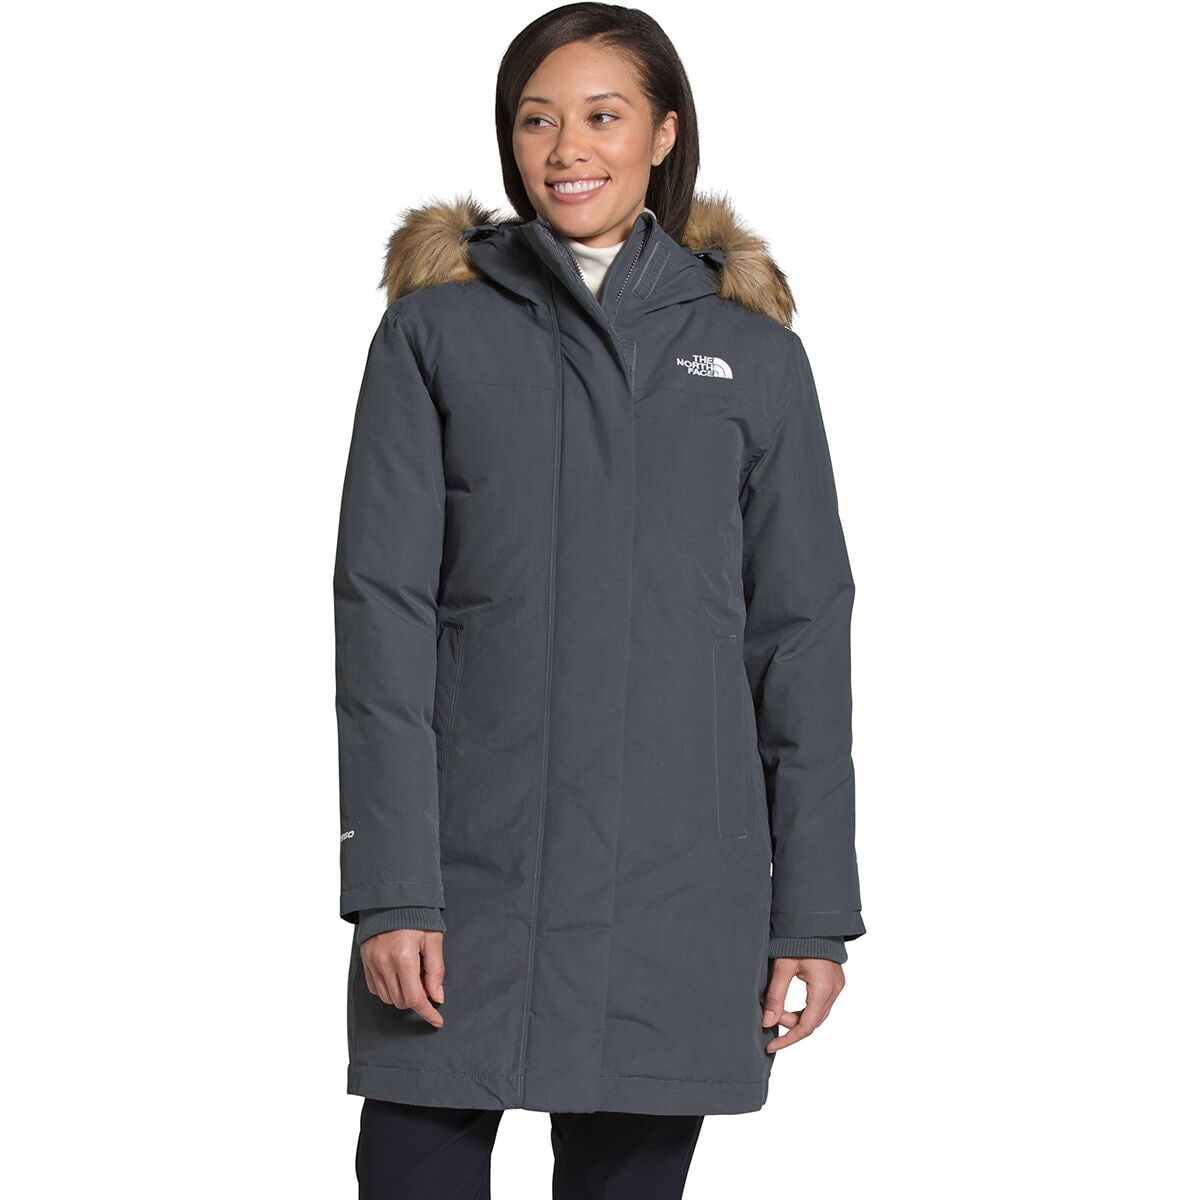 womens arctic parka free shipping the north face on women's arctic parka grey